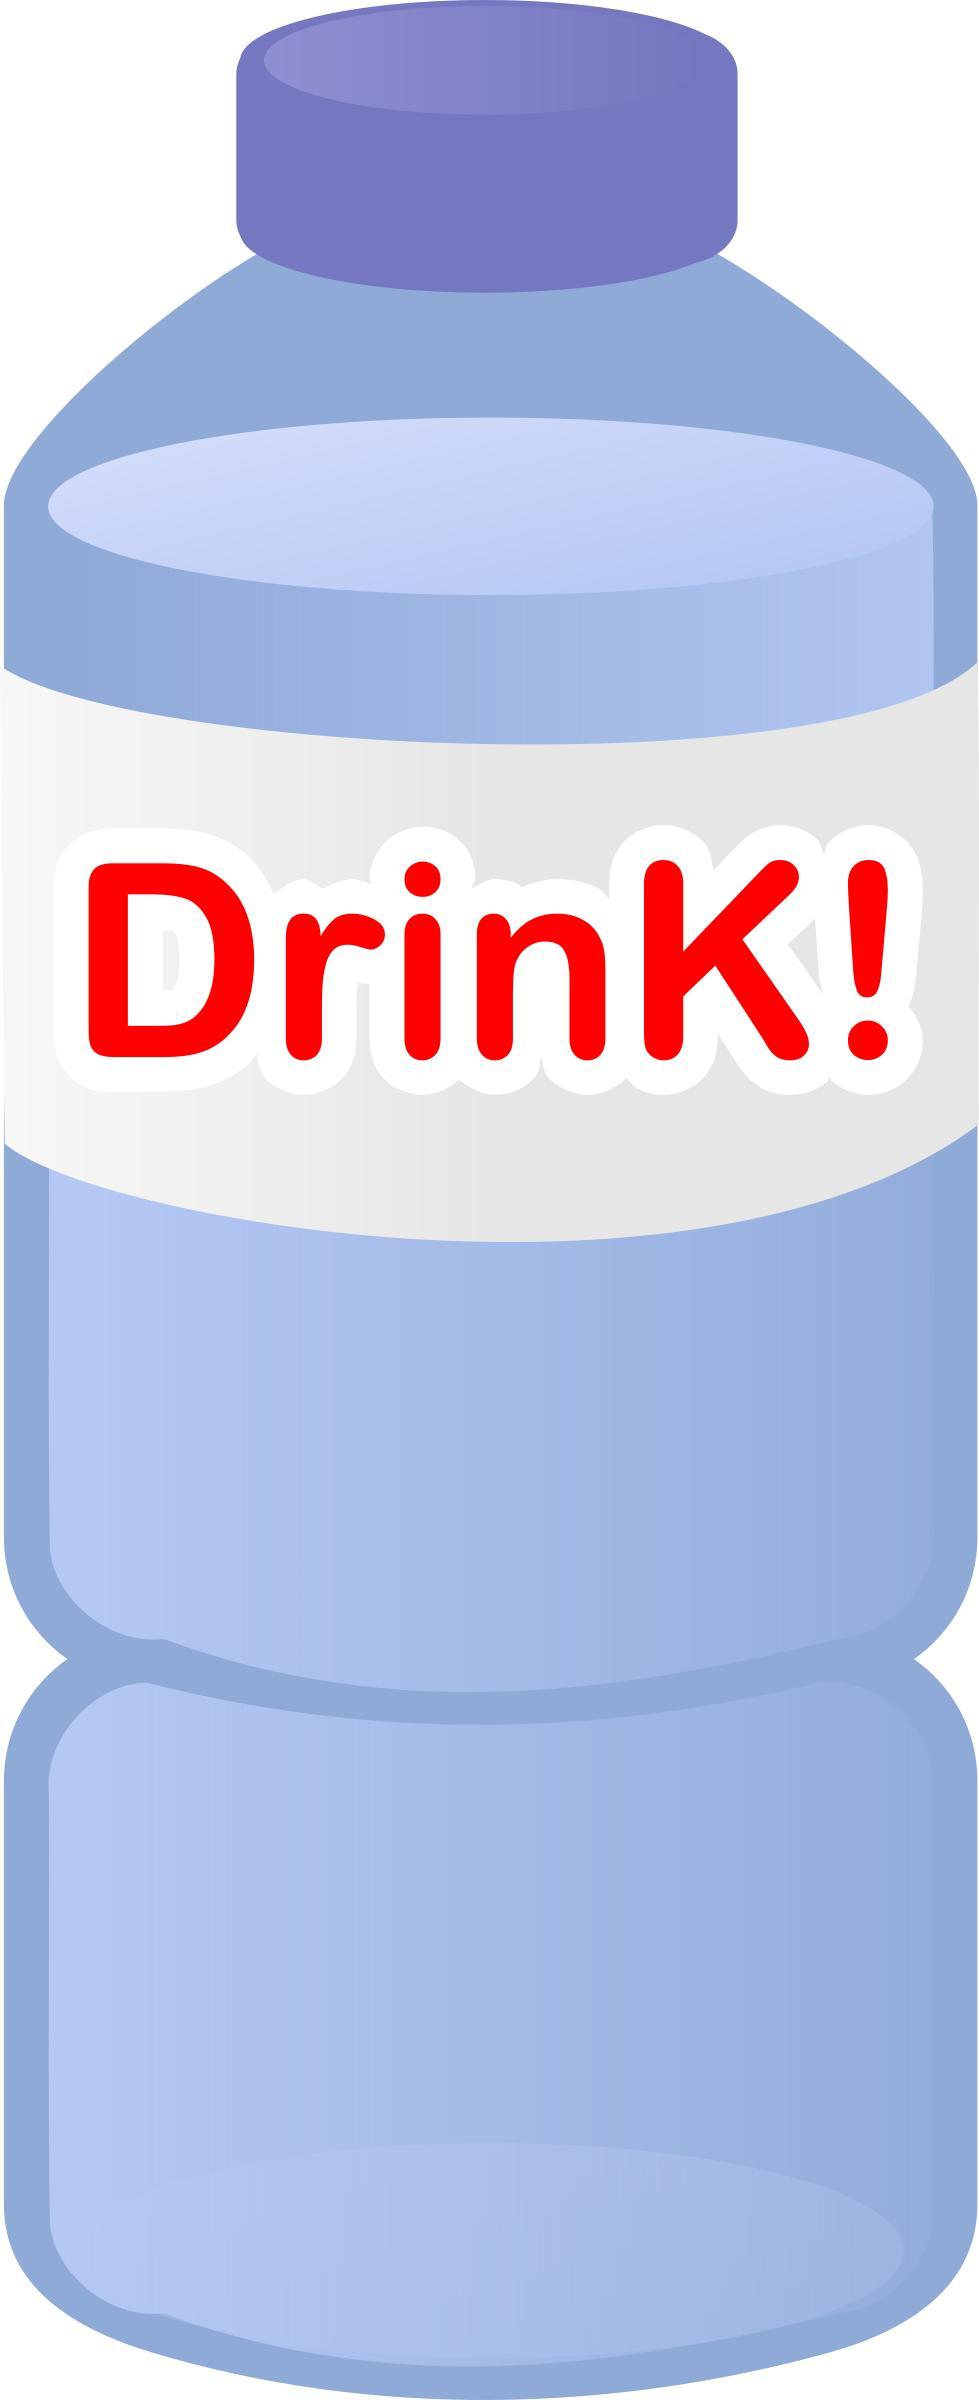 Small Water Bottle png transparent